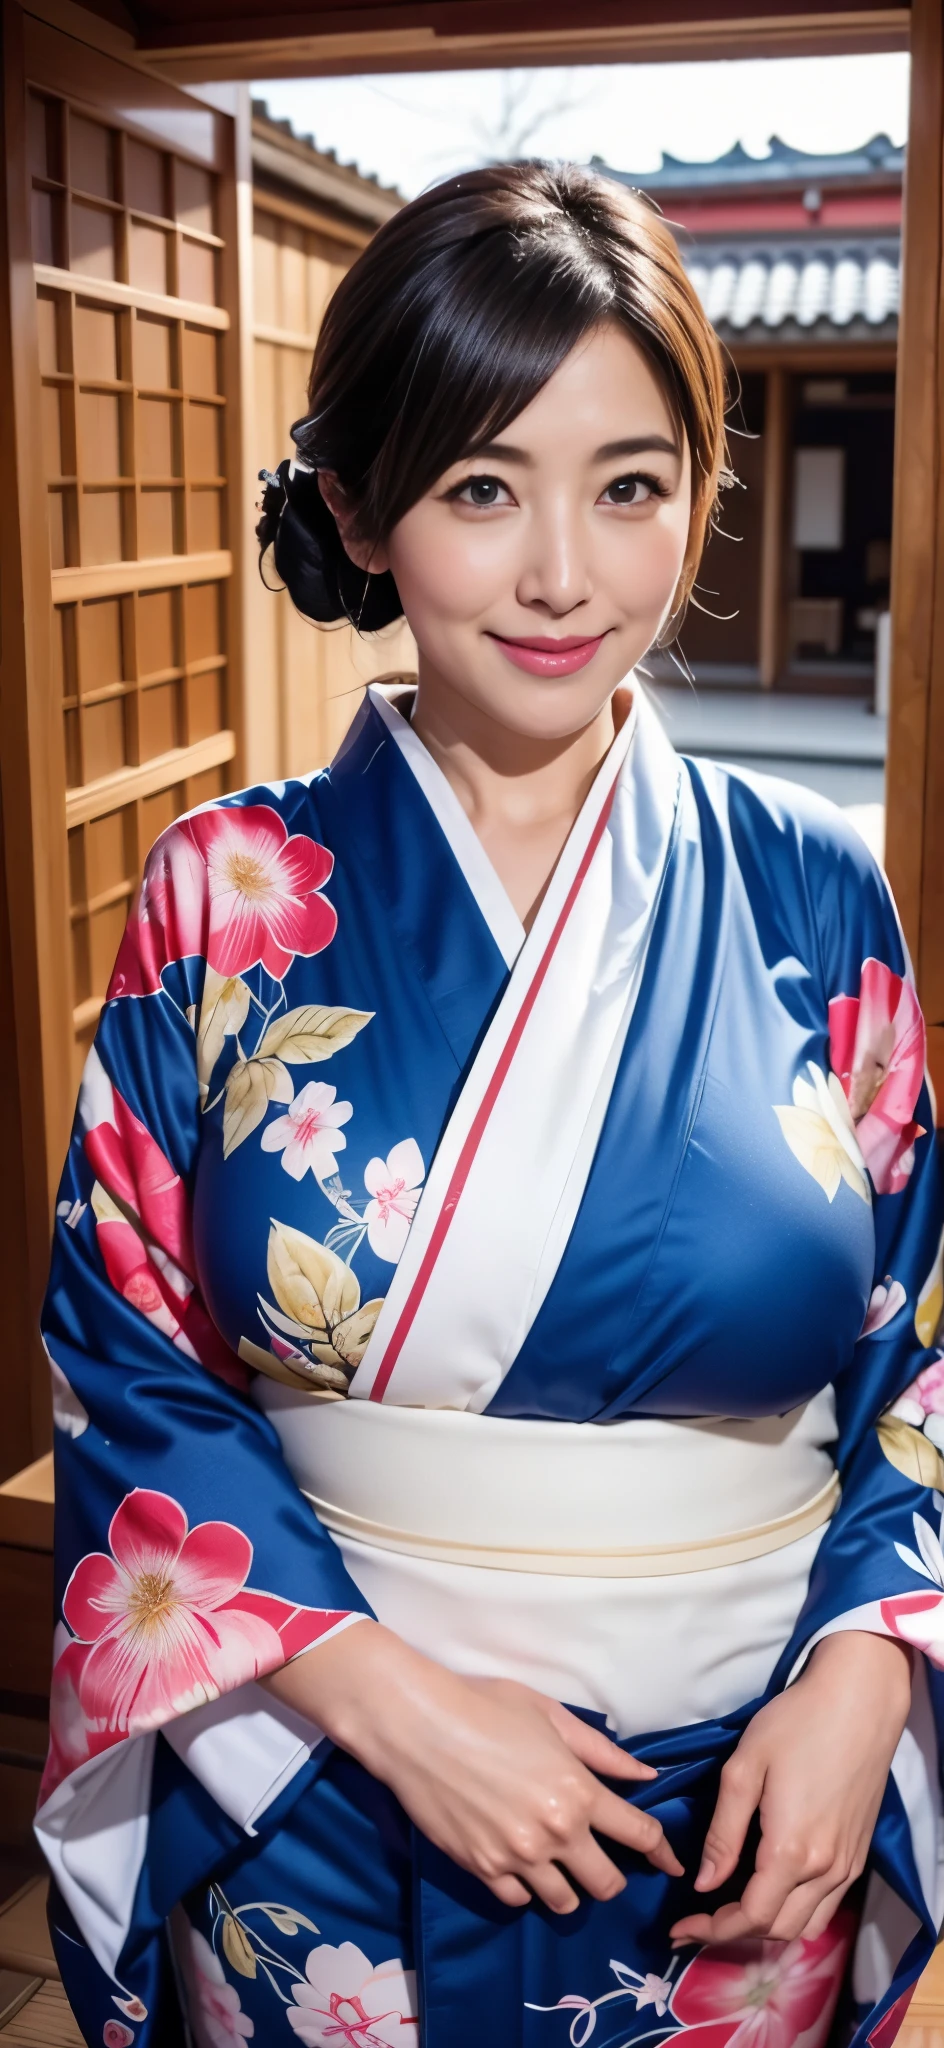 The most beautiful moms in the Japan(Giant body)、Wearing a kimono、Japanese style room、Huge breasts that are too big and droop a little、January、With smiling eyes、new year greetings